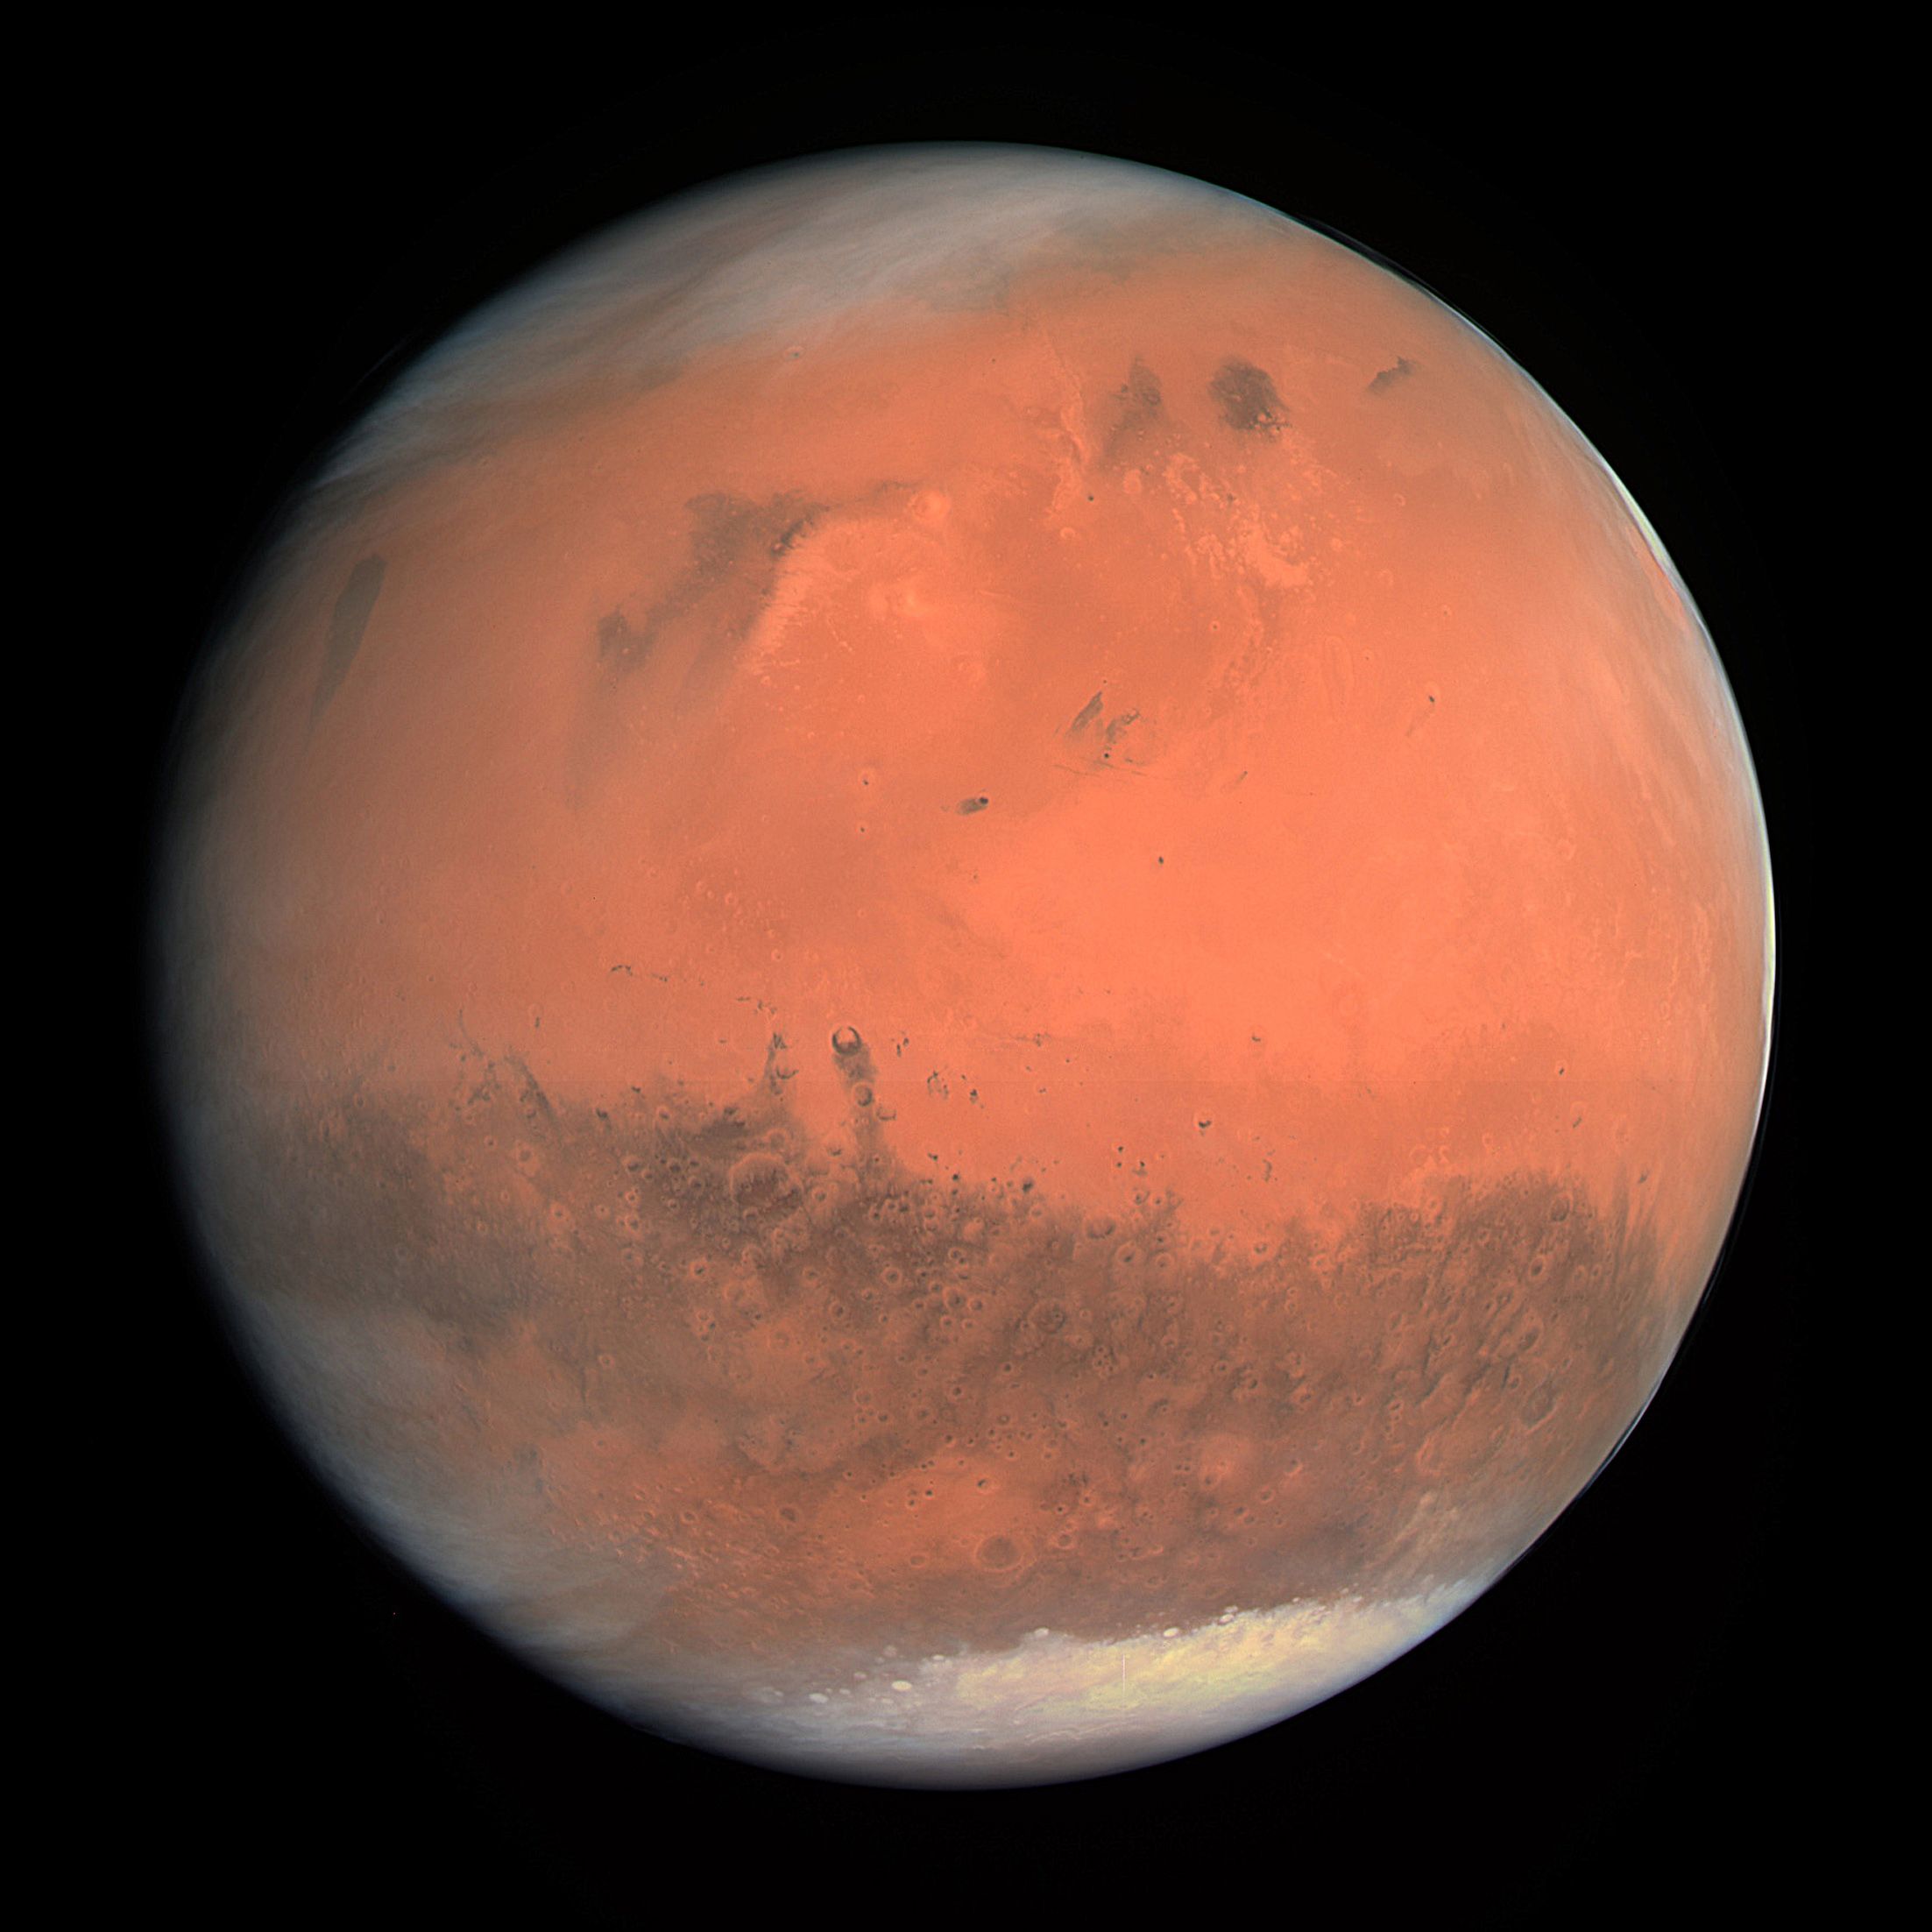 about life on planet mars